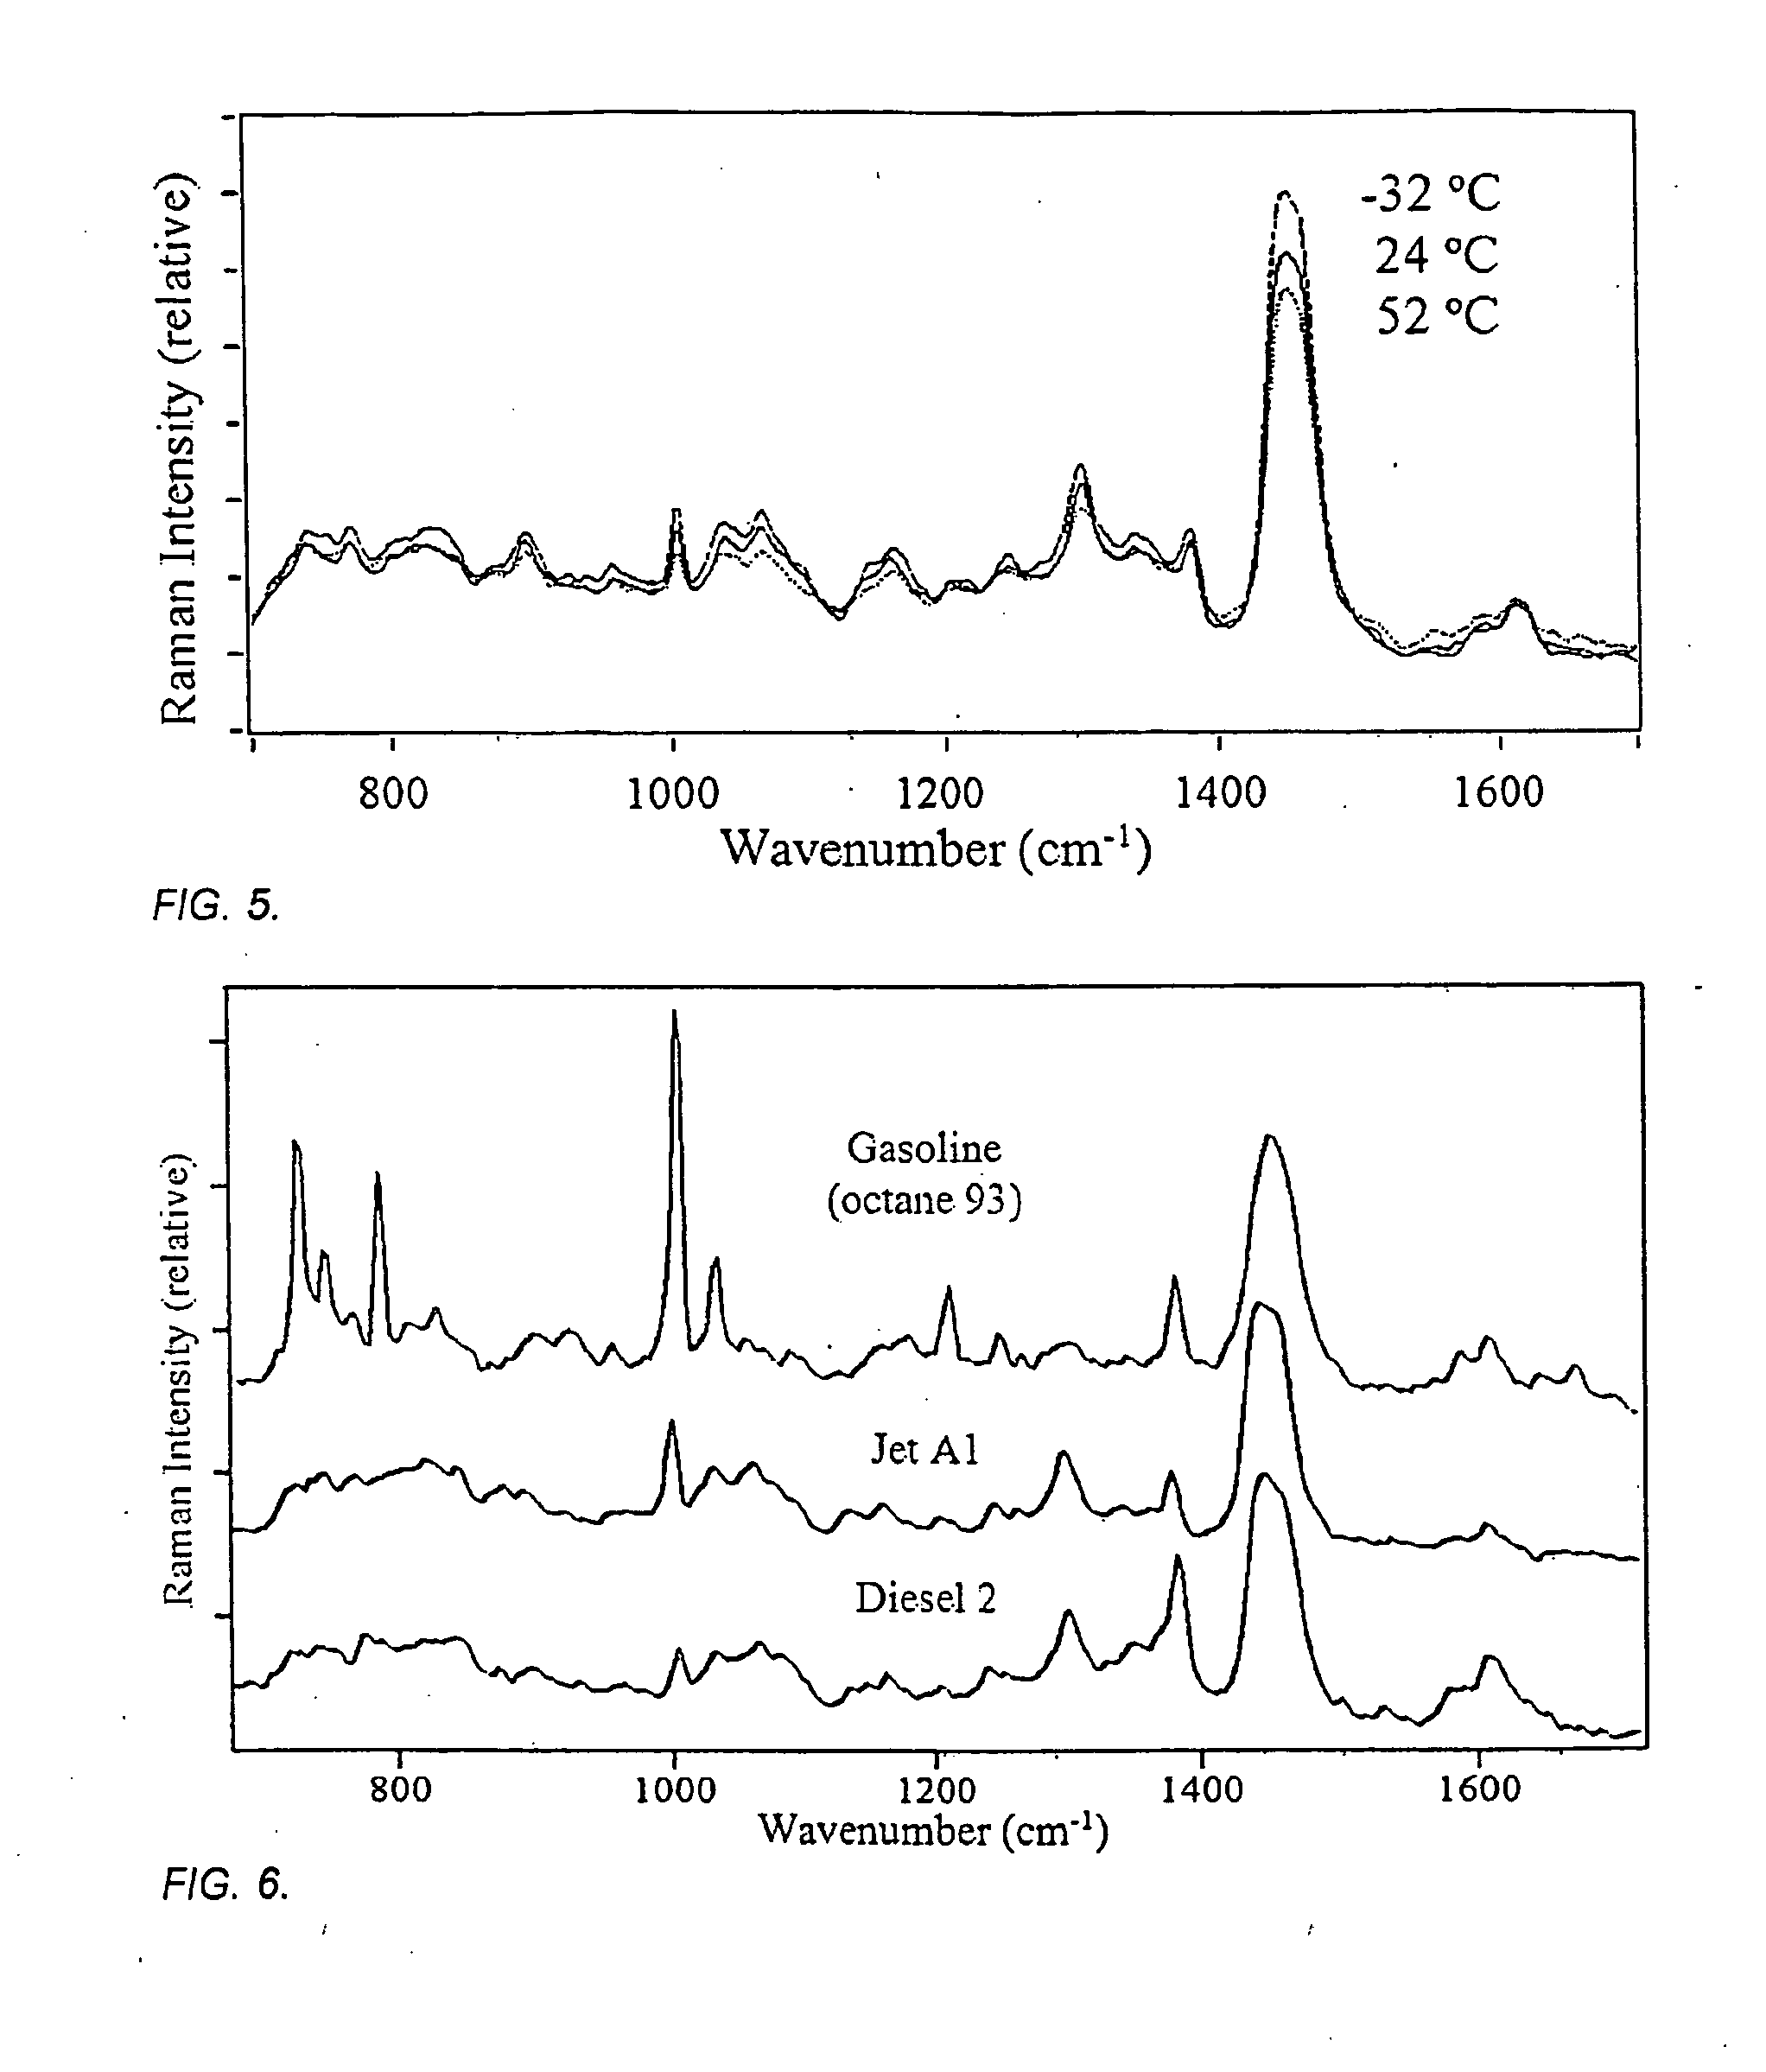 Method of monitoring and controlling activity involving a fuel composition